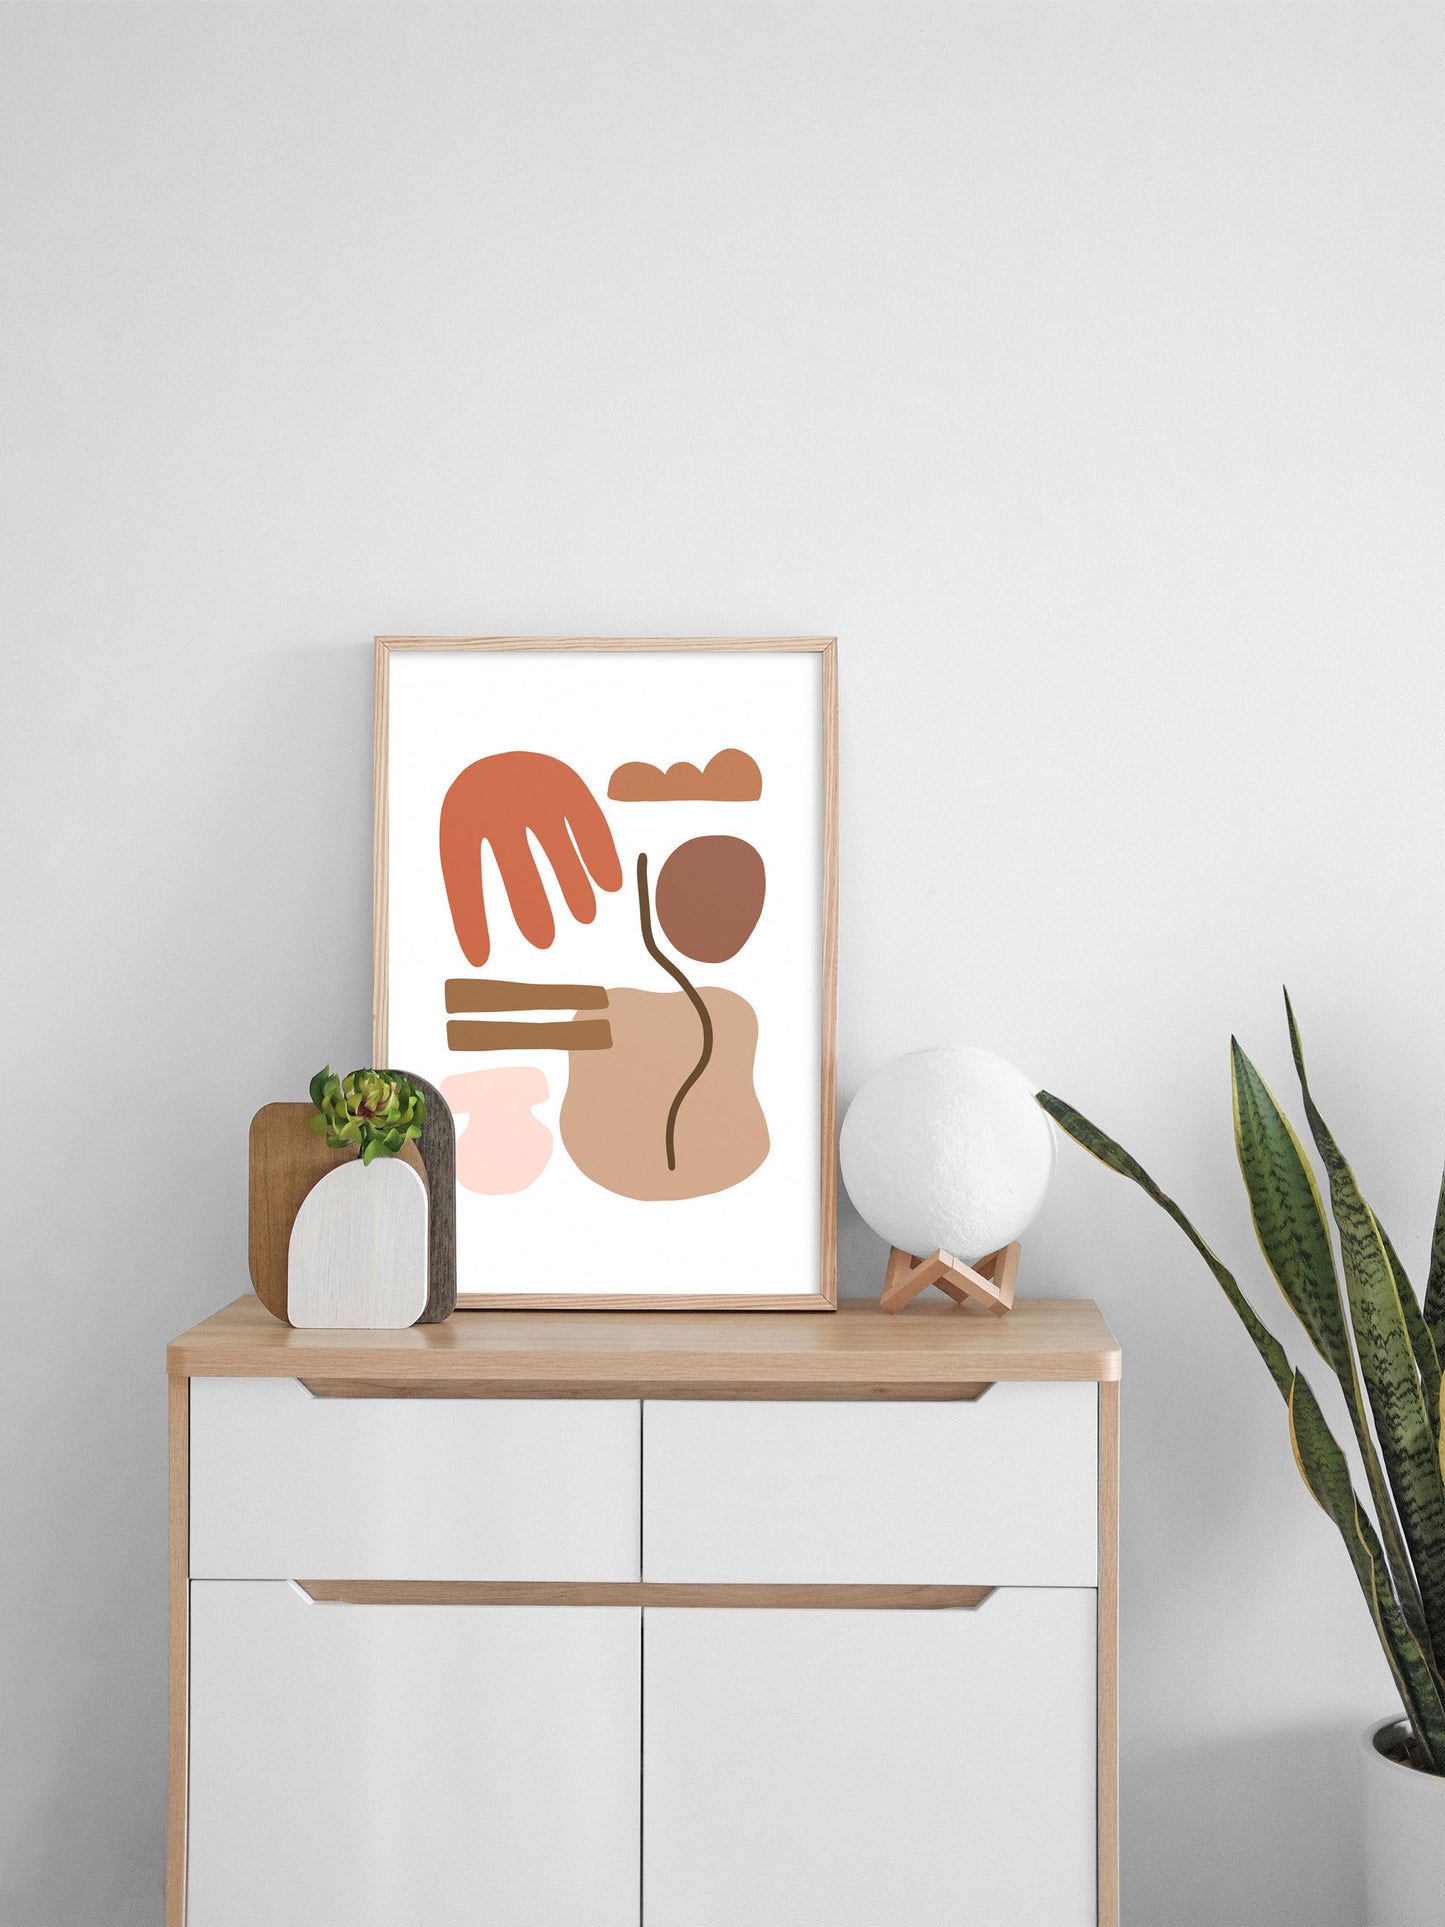 Abstract Poster Art Print - Abstract Shapes Wall Print - Beige Brown Orange